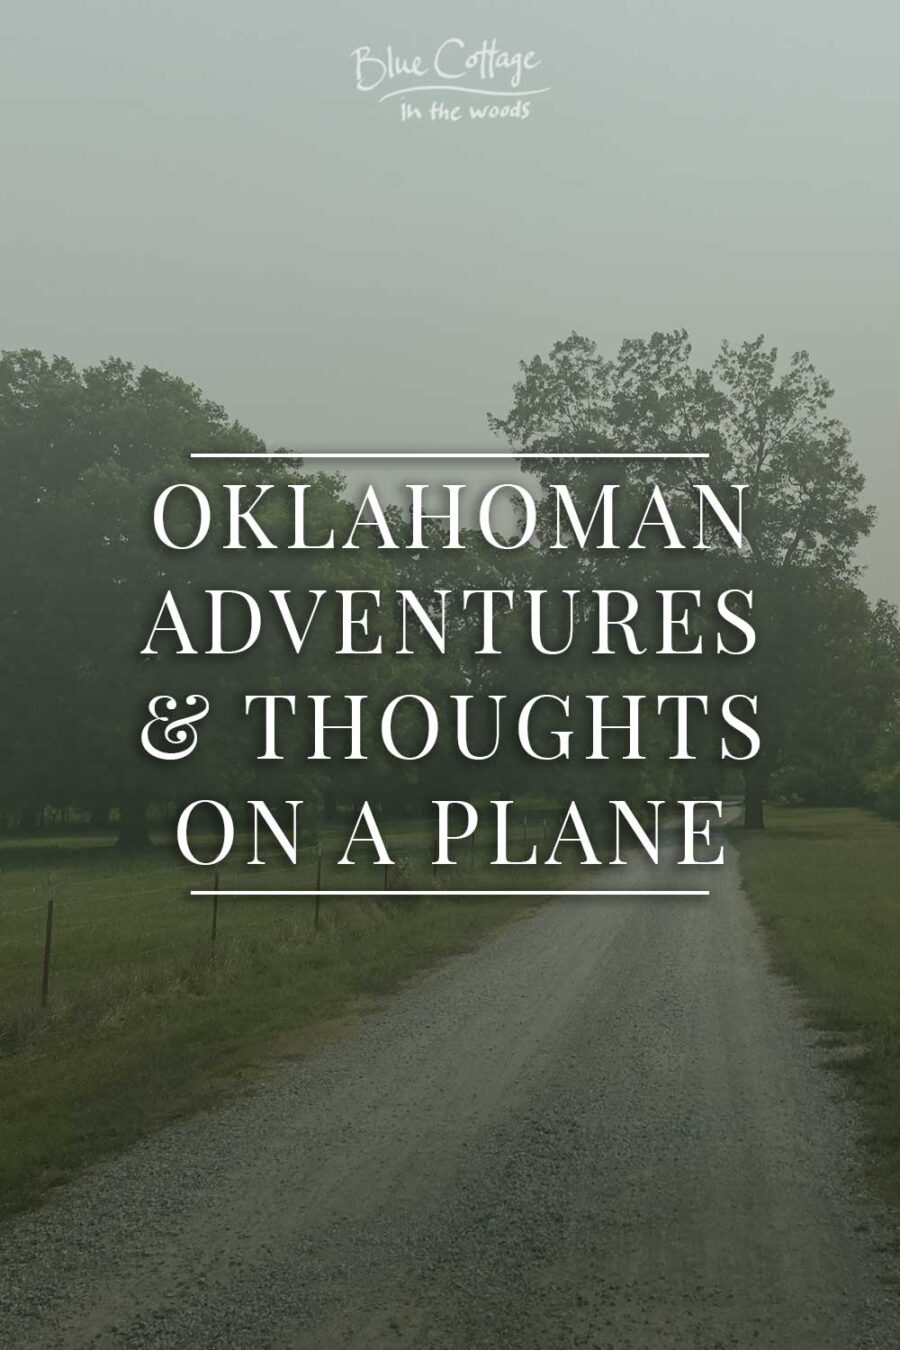 Oklahoman Adventures & Thoughts on a Plane